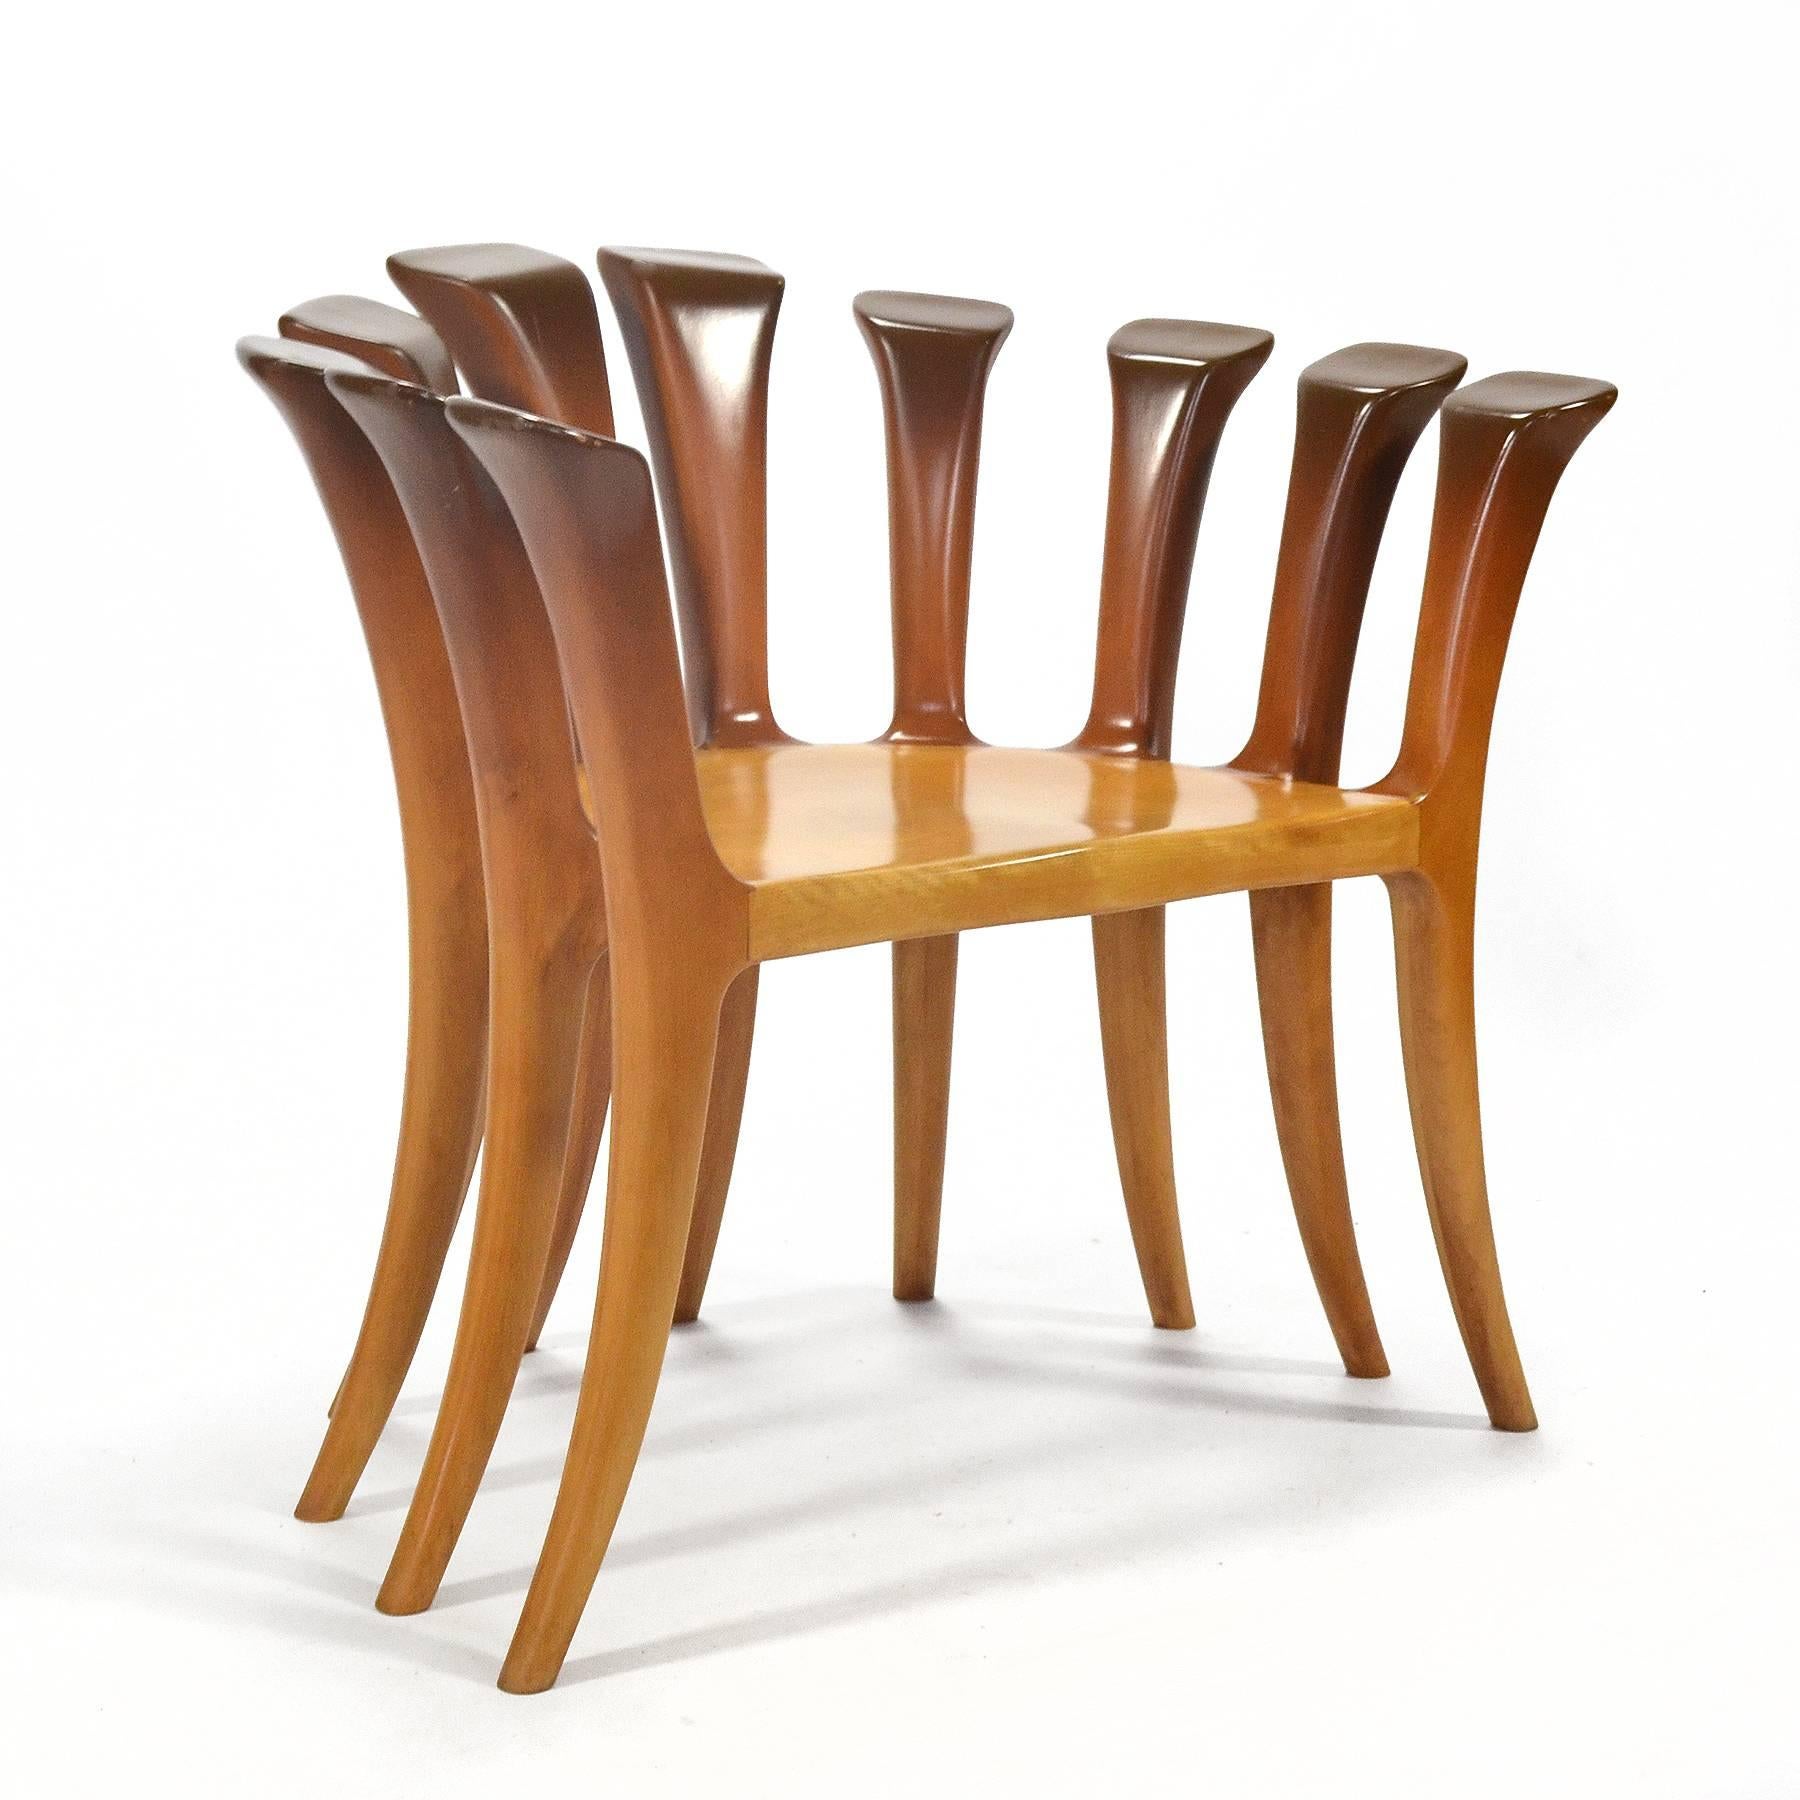 This incredibly well designed and well crafted chair is a powerful statement piece. With ten legs that curve and flare as they move upwards to suspend the seat as they form the back and arms. Sadly, it is unsigned and we do not know the artist who